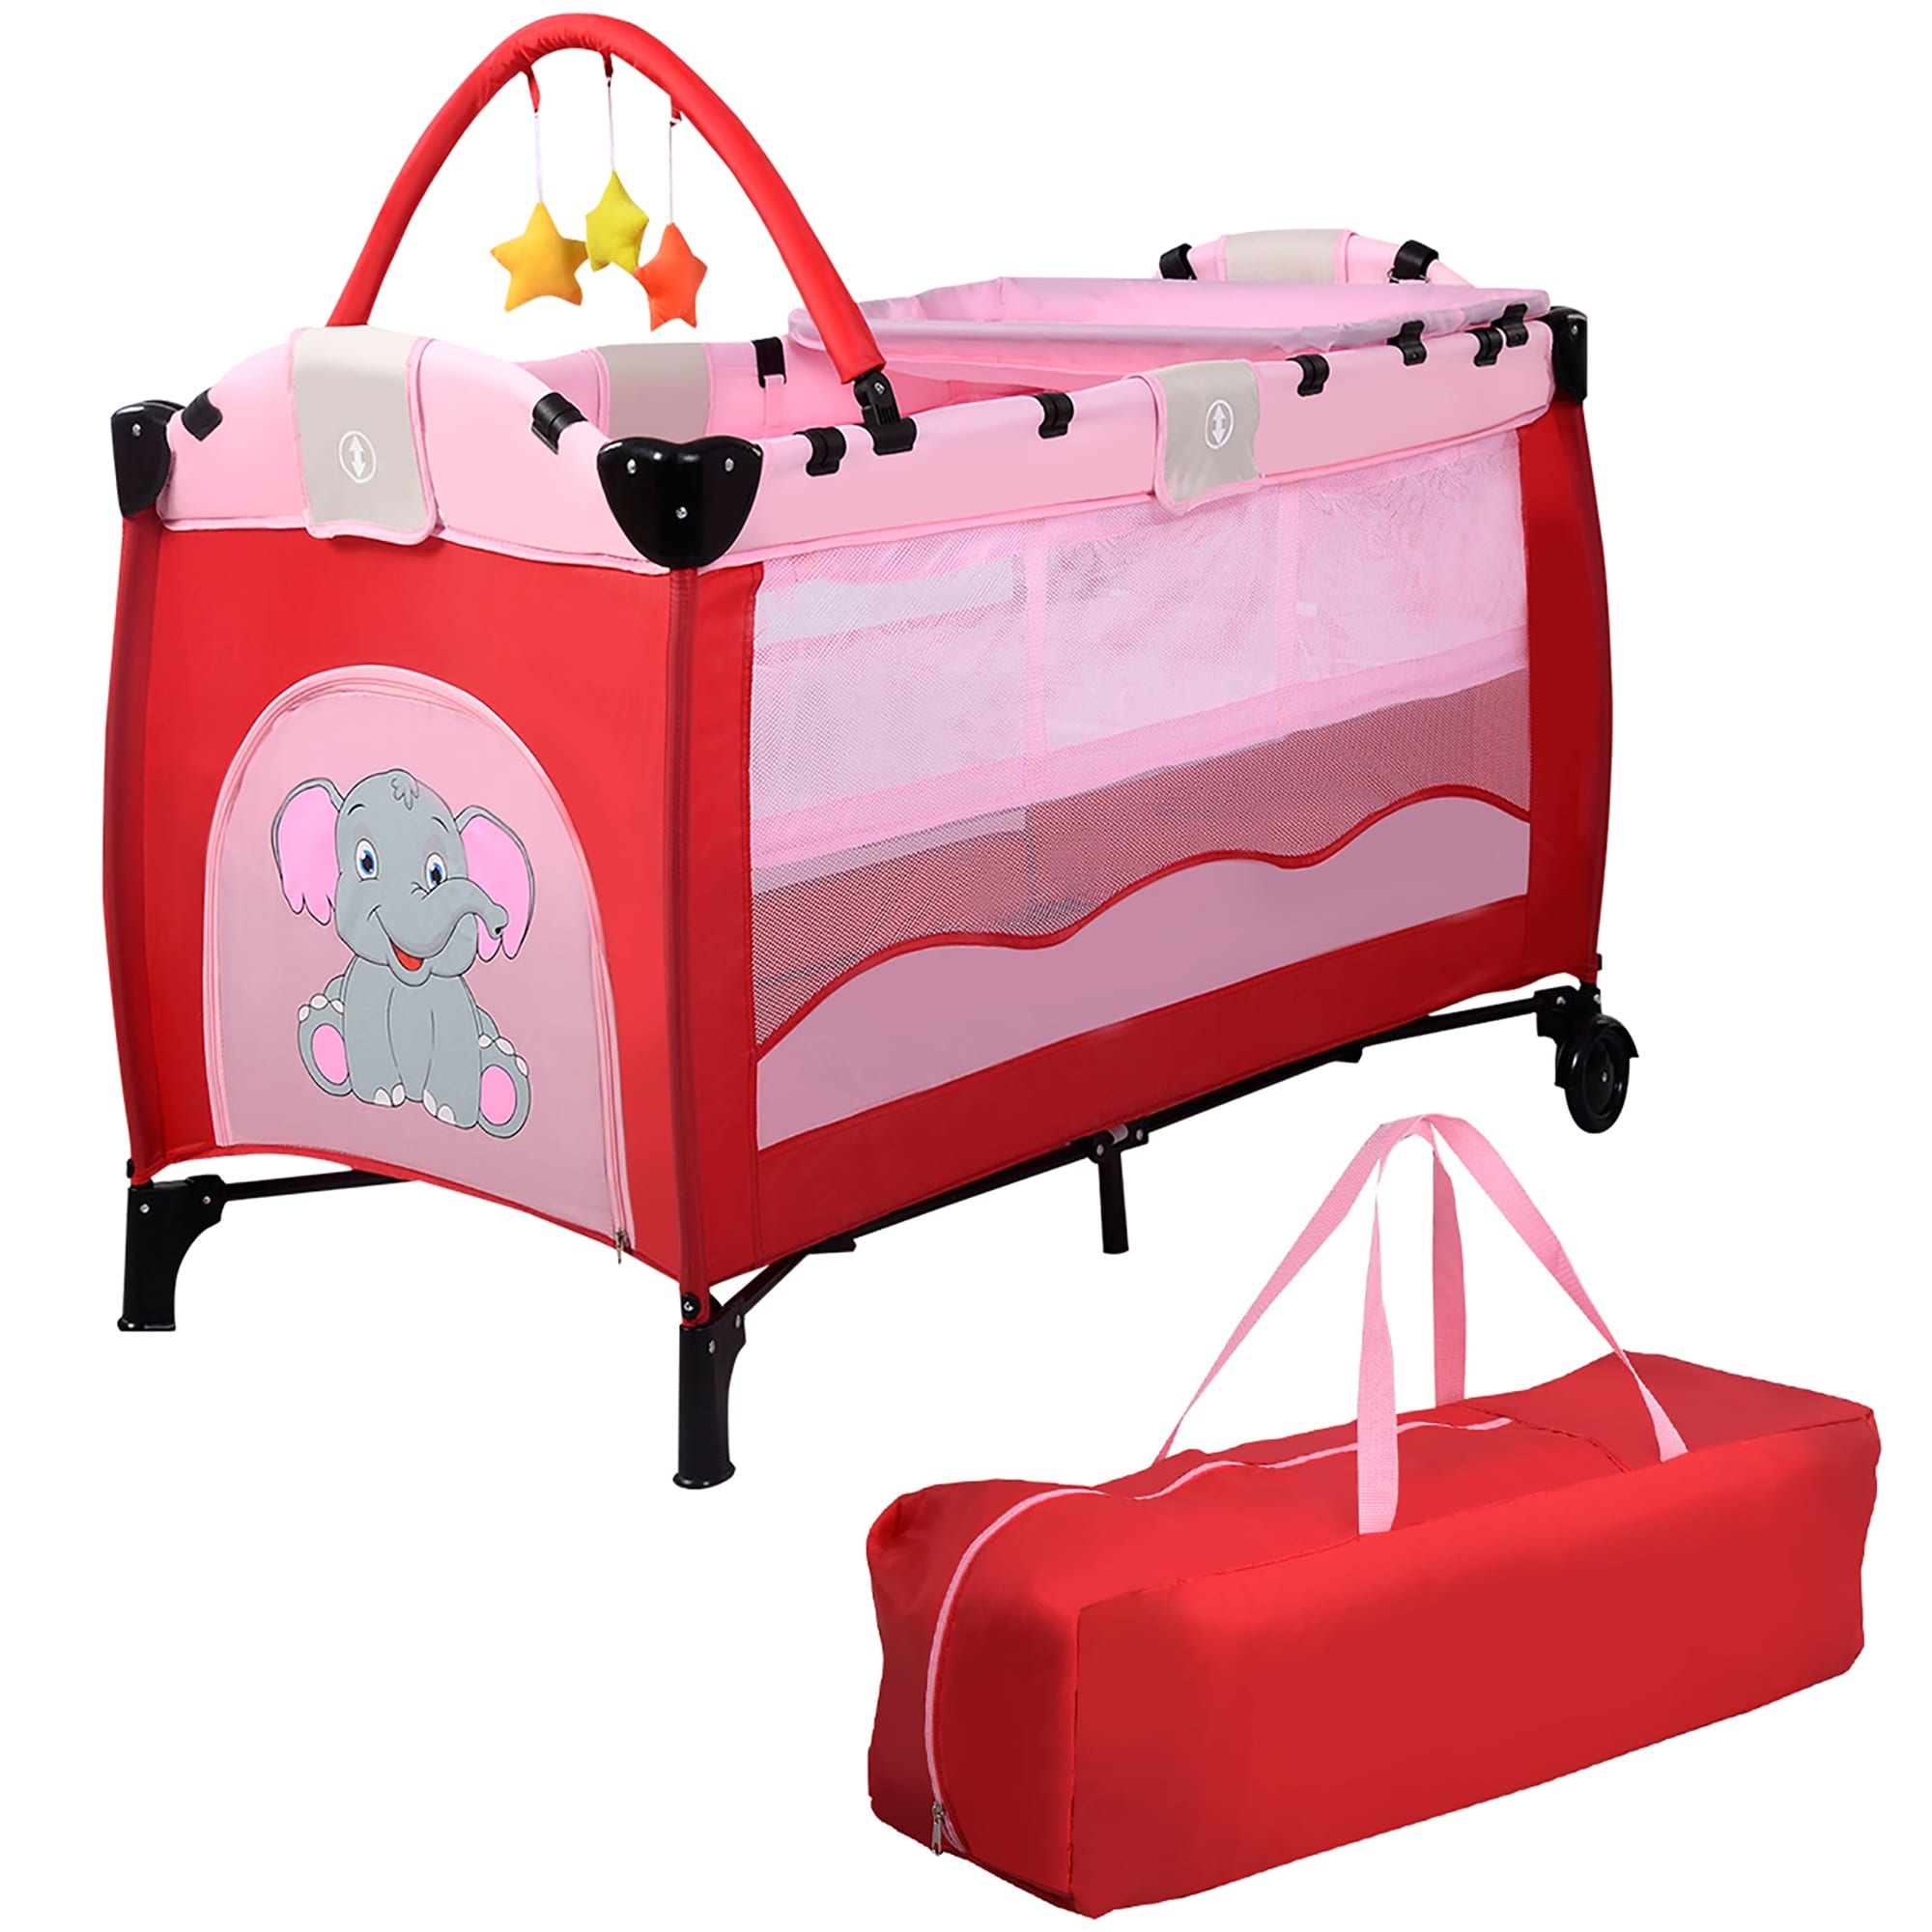 Portable Baby Playard Travel Bassinet Bed with Hanging Toys